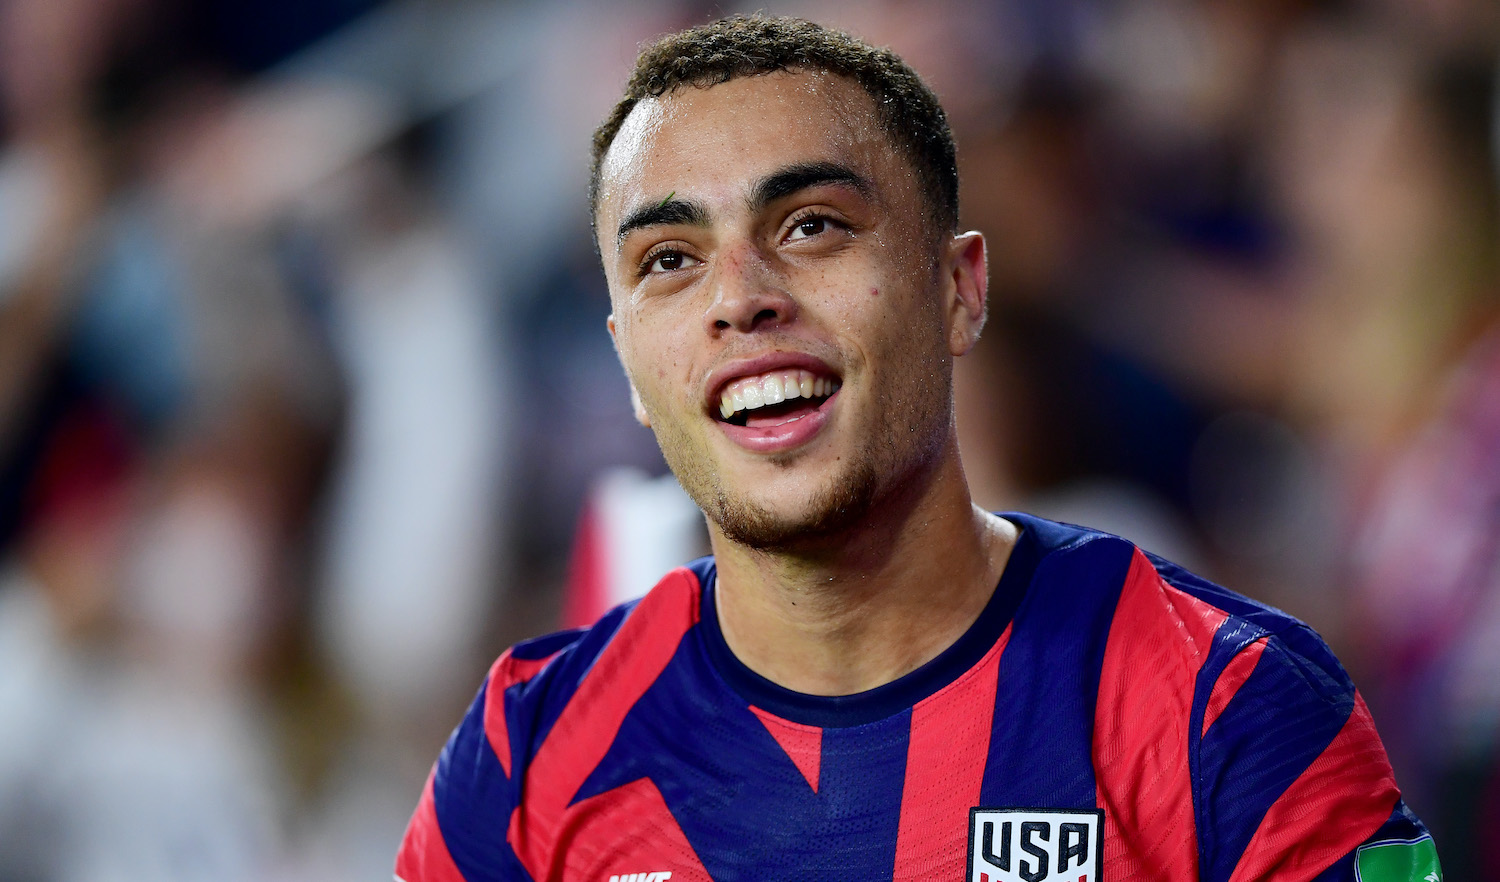 COLUMBUS, OHIO - OCTOBER 13: Sergiño Dest #2 of the United States reacts as he is substituted out of the game during the second half of a 2022 World Cup Qualifying match against Costa Rica at Lower.com Field on October 13, 2021 in Columbus, Ohio. (Photo by Emilee Chinn/Getty Images)